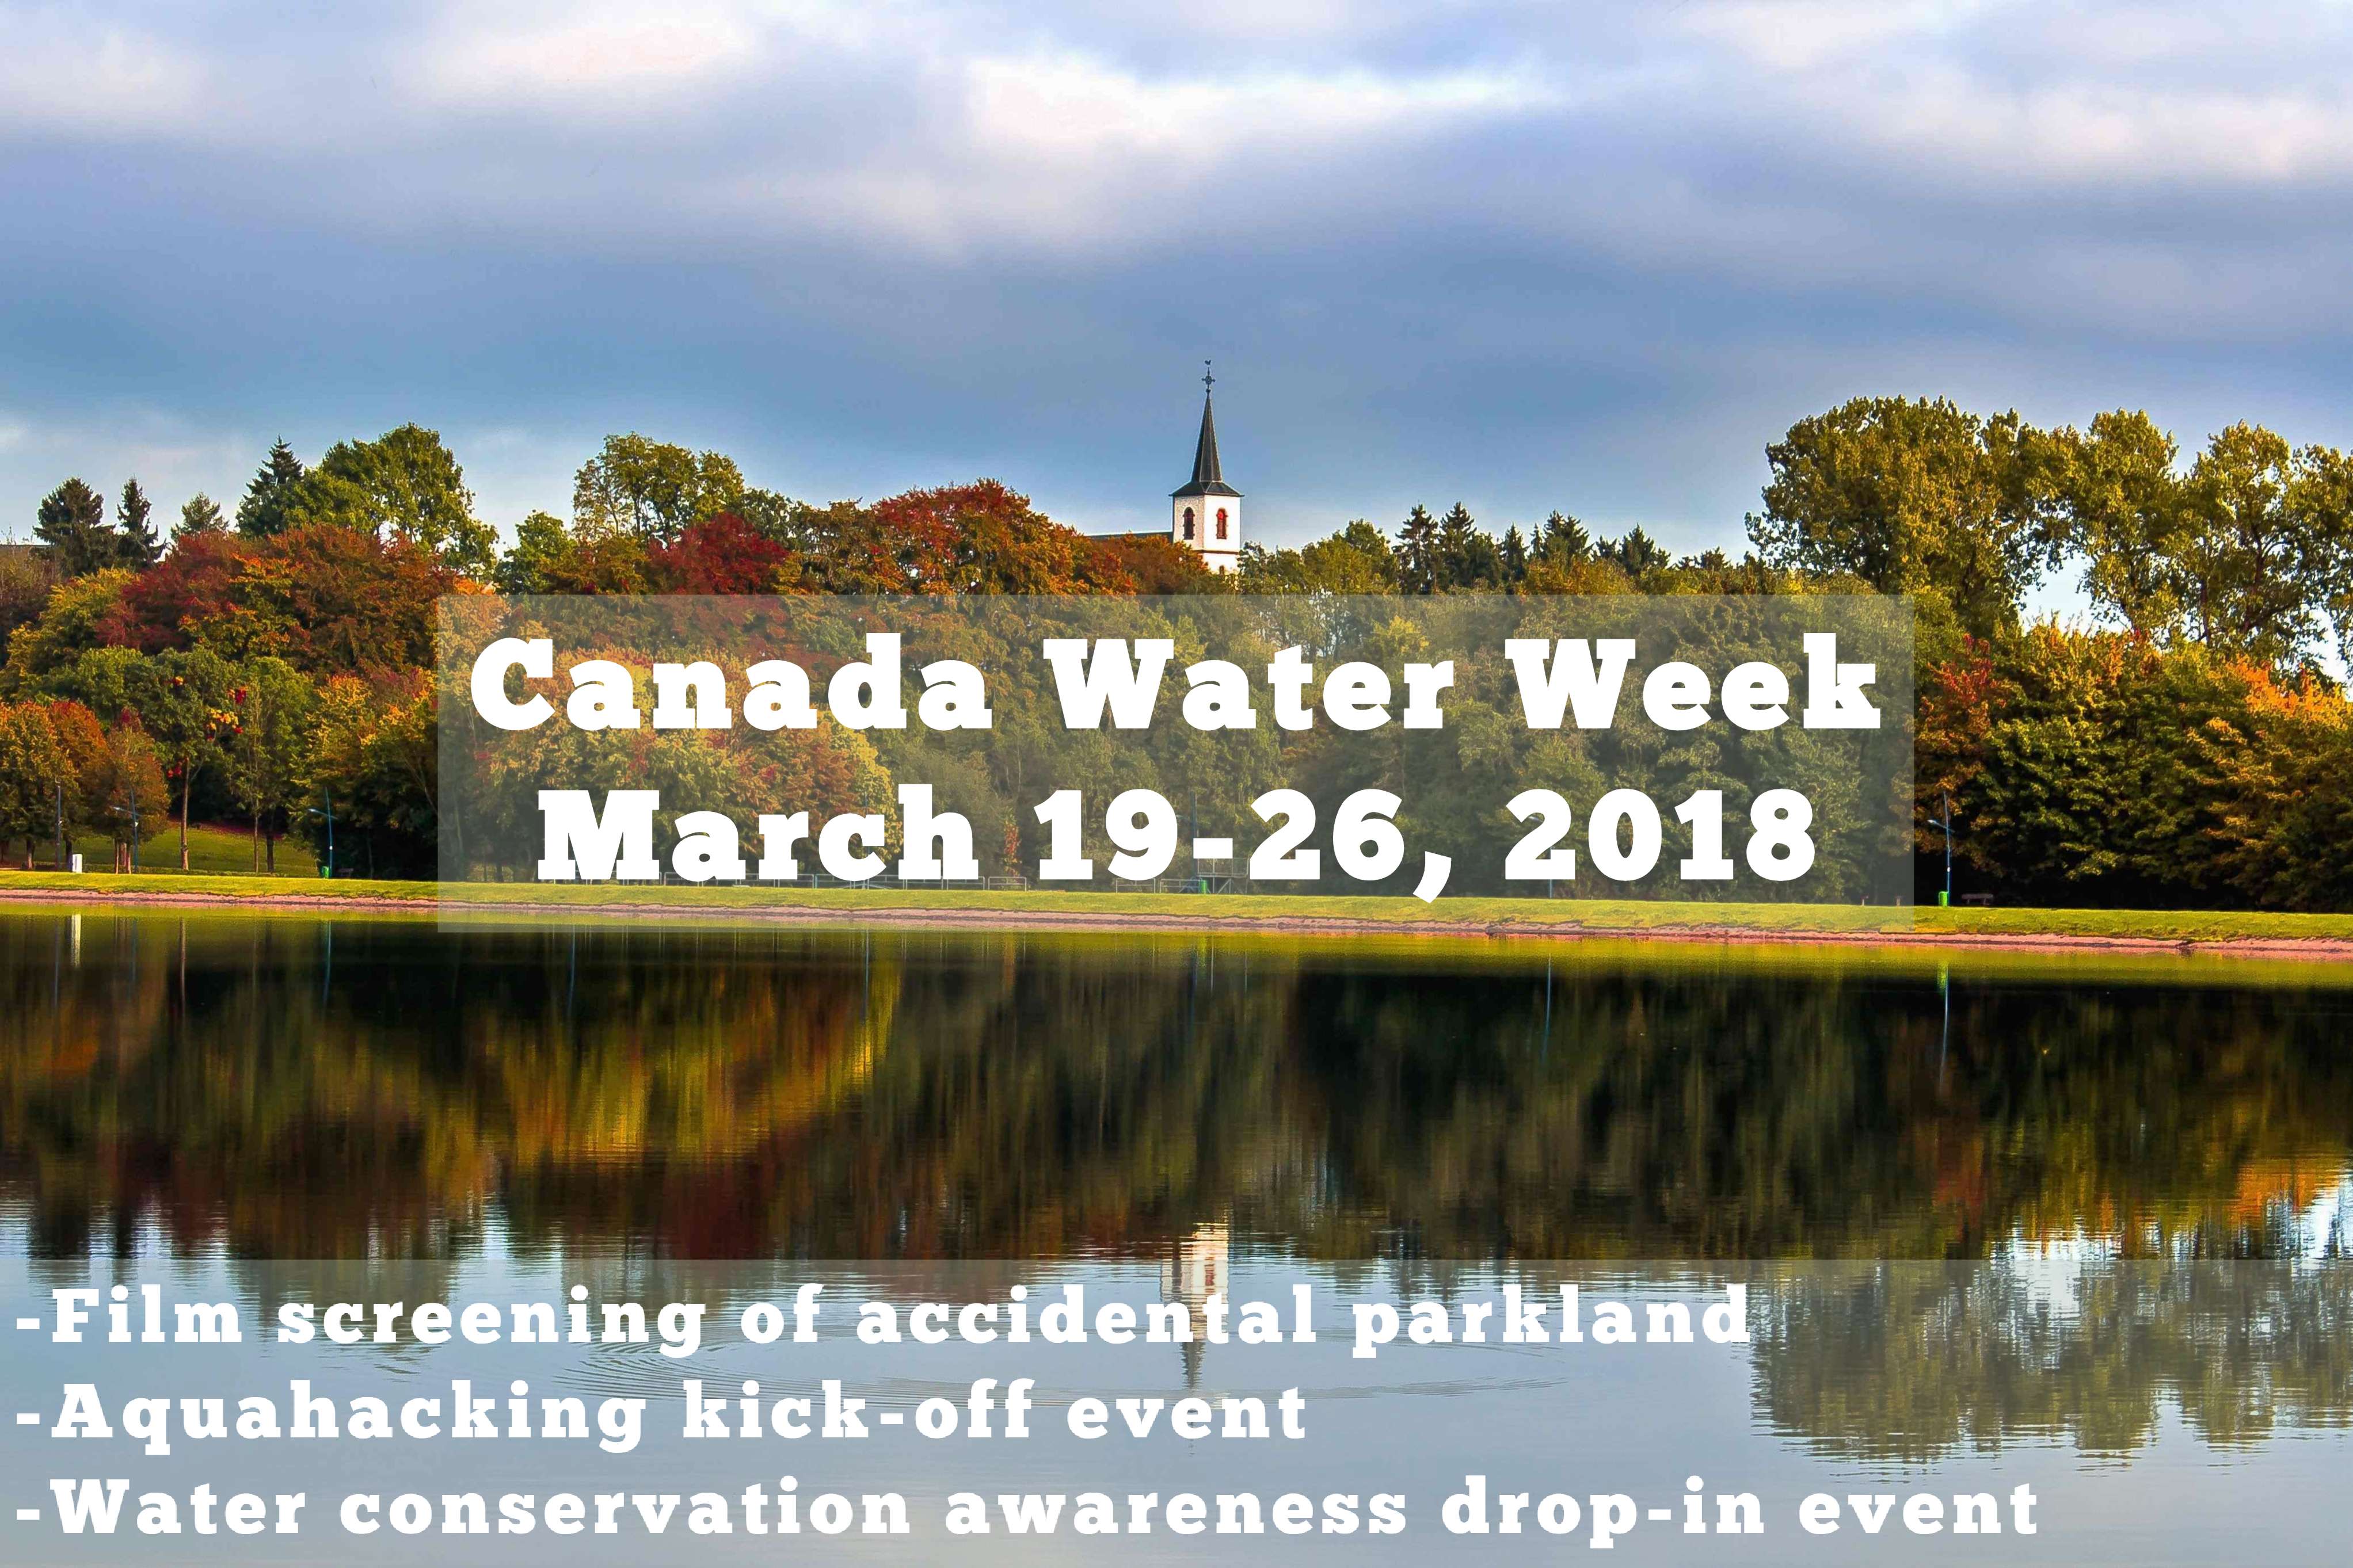 lake with trees surrounding it, with overlaying text describing Canada water week